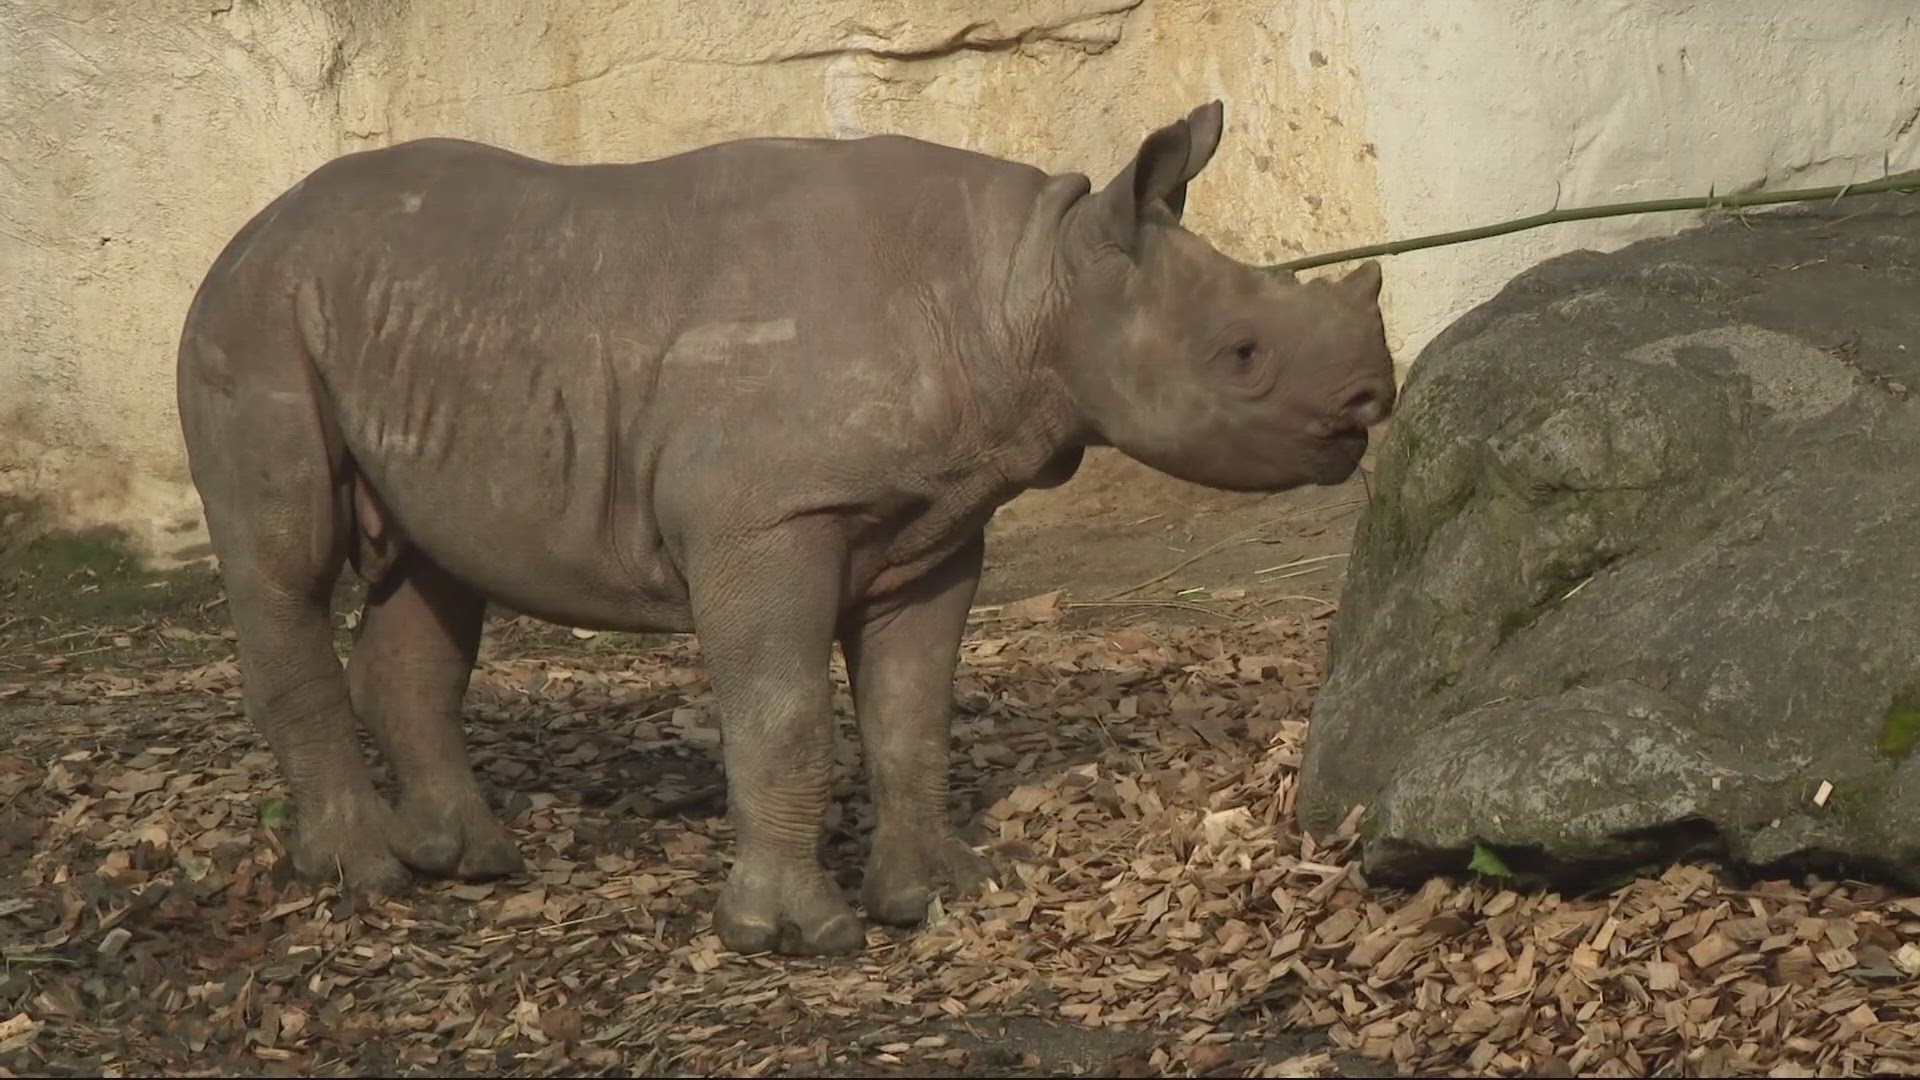 The Oregon Zoo is home to two Black Rhinoceros parents, King and Jozi, and they just welcomed their new 3-month-old baby rhino, Tamu.